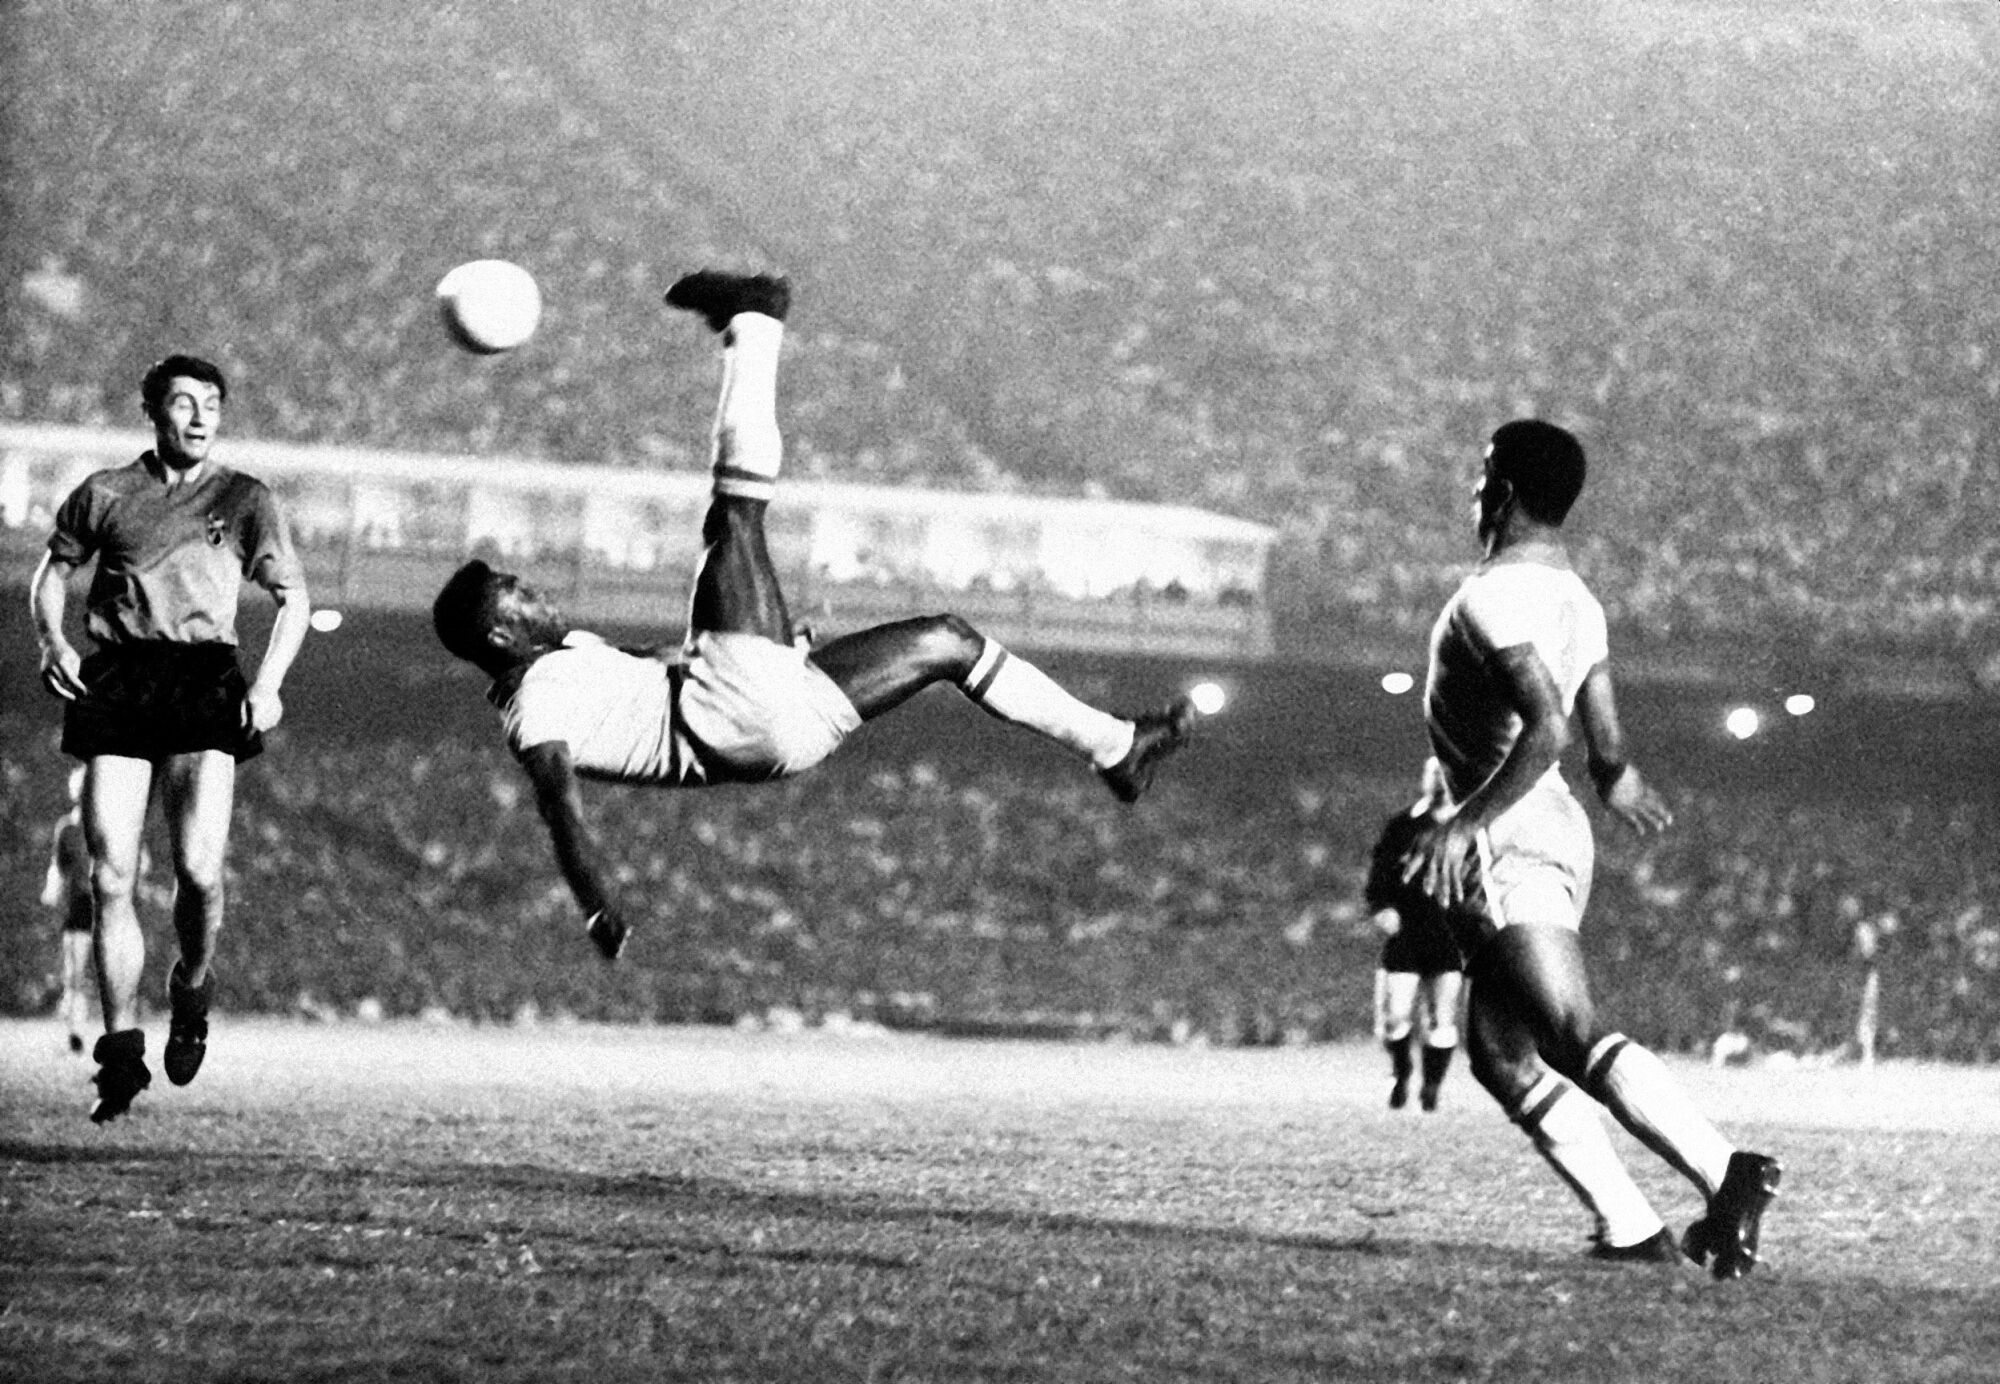 In this Sept. 1968 file photo, Brazil's Pele kicks the ball during a friendly soccer game against Belgium.